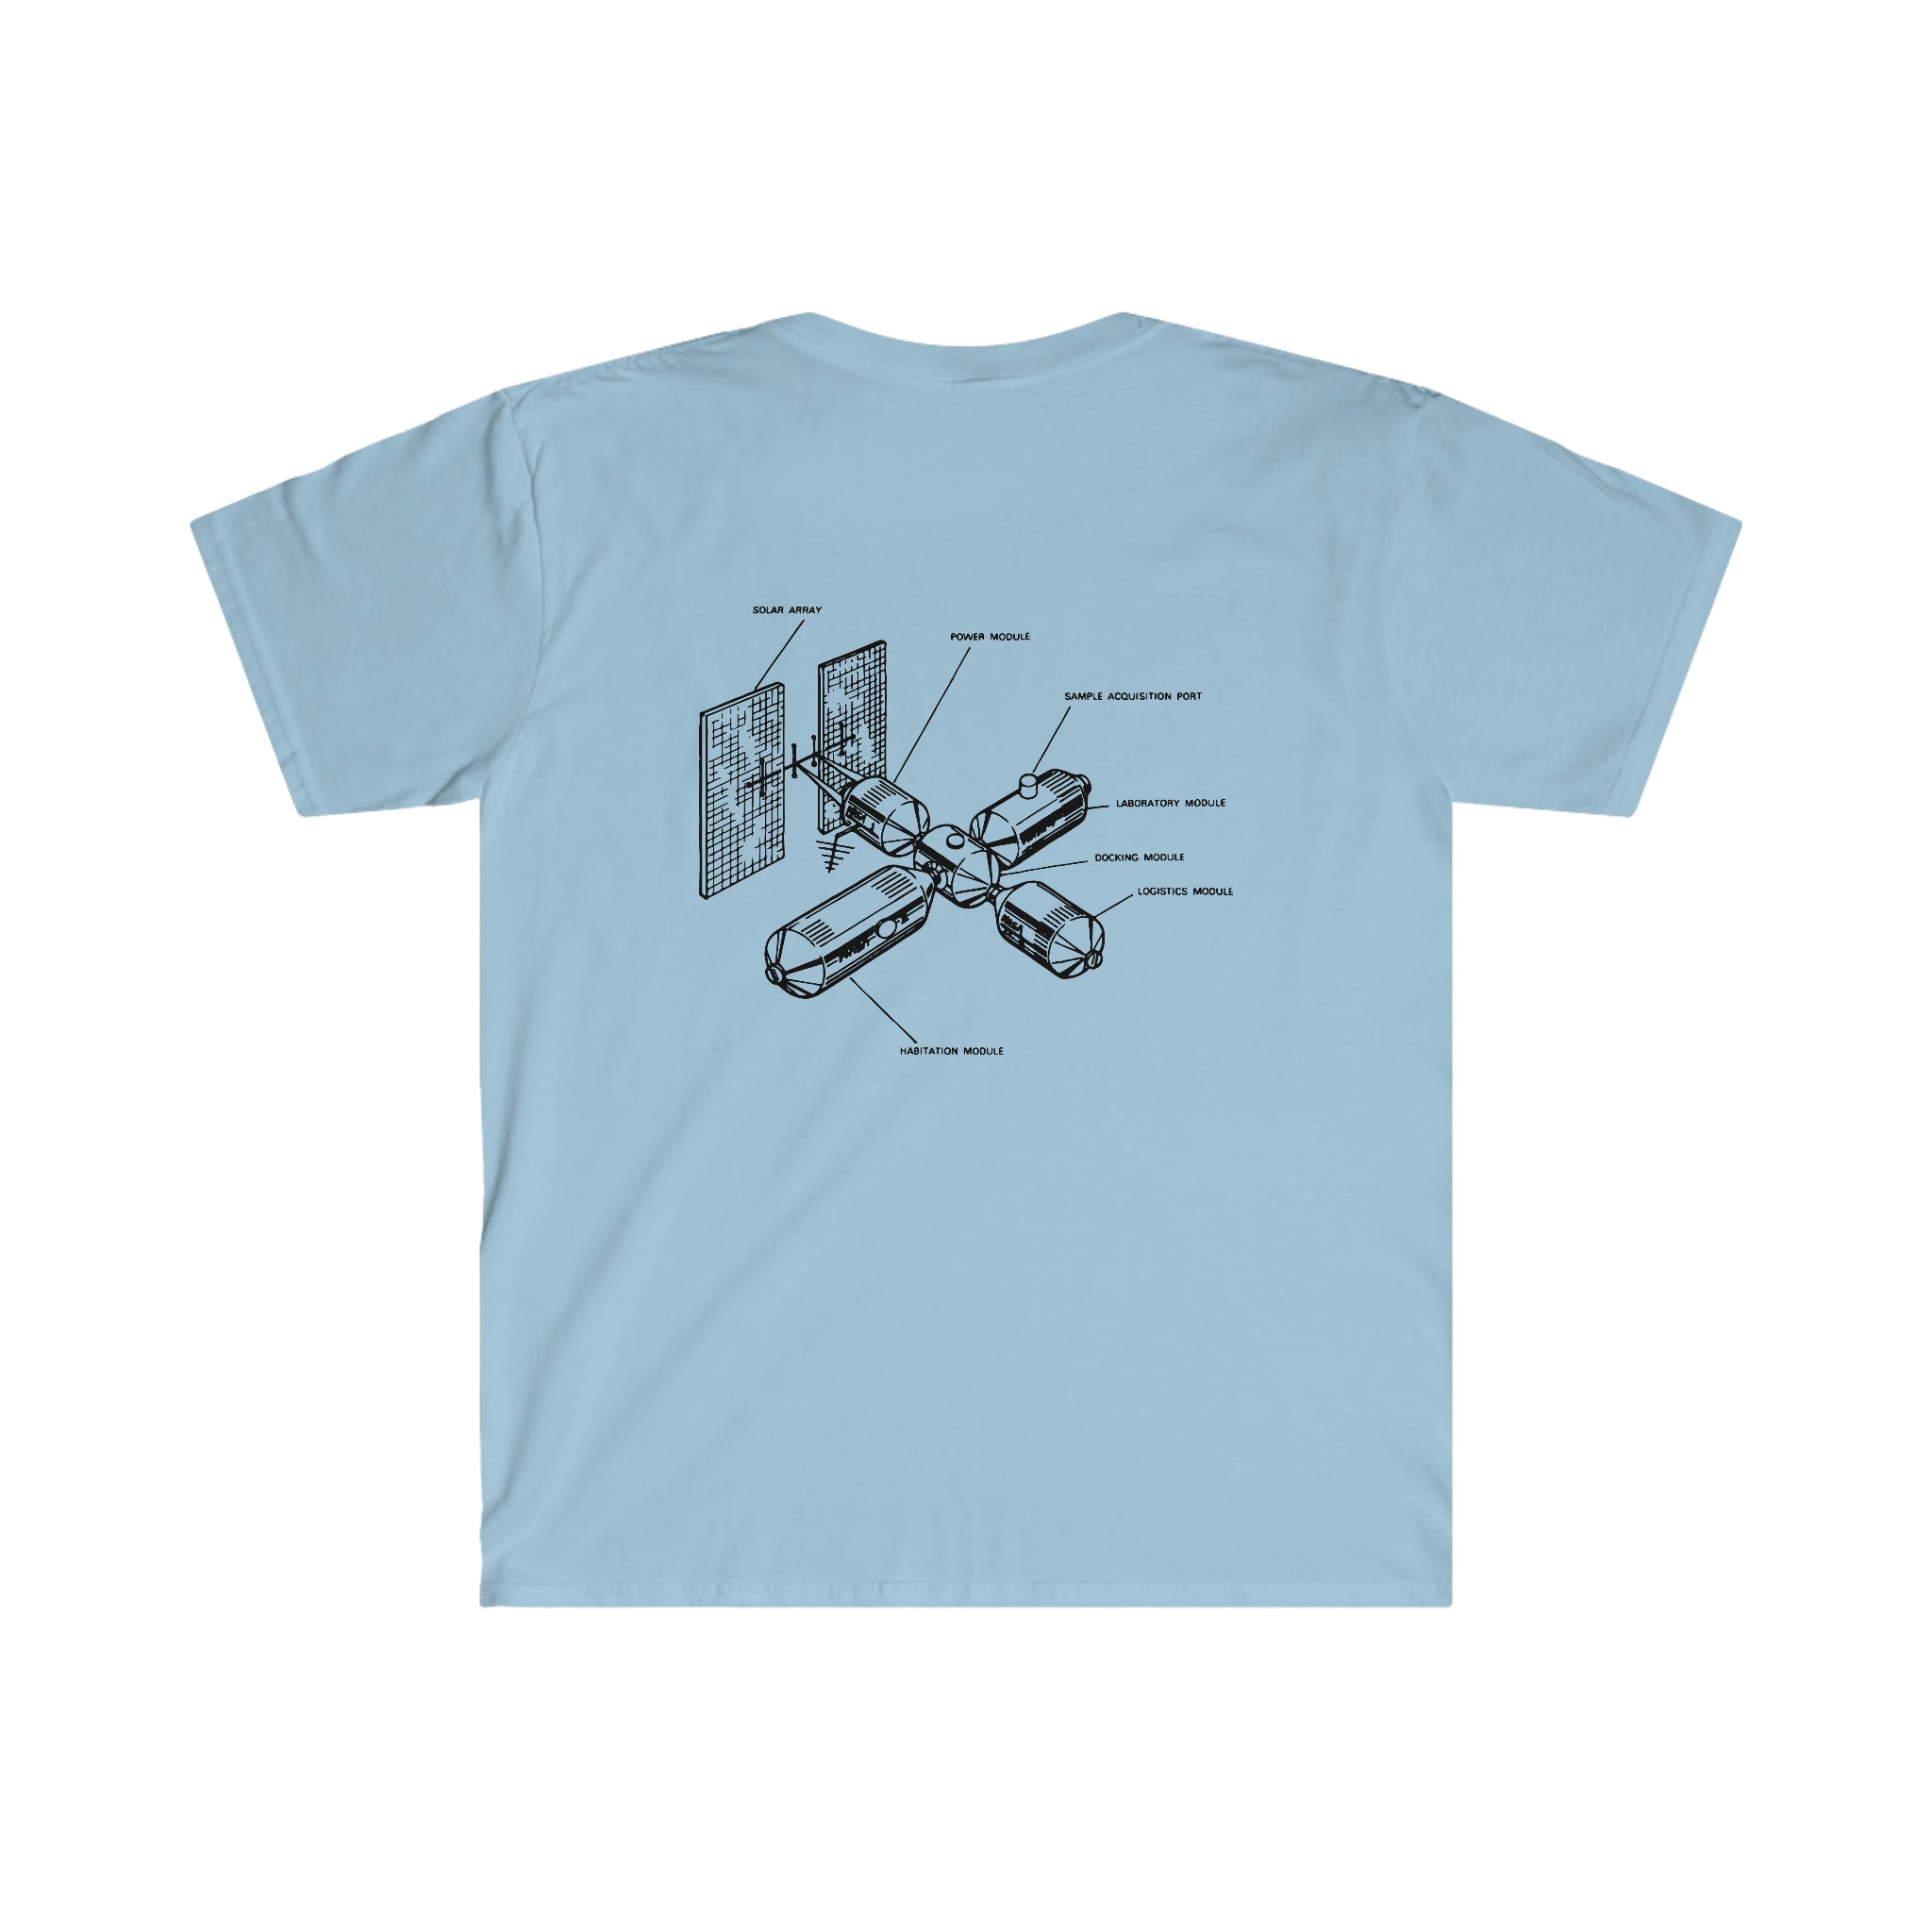 A Space Station T-Shirt with a diagram of a spacecraft and space exploration.